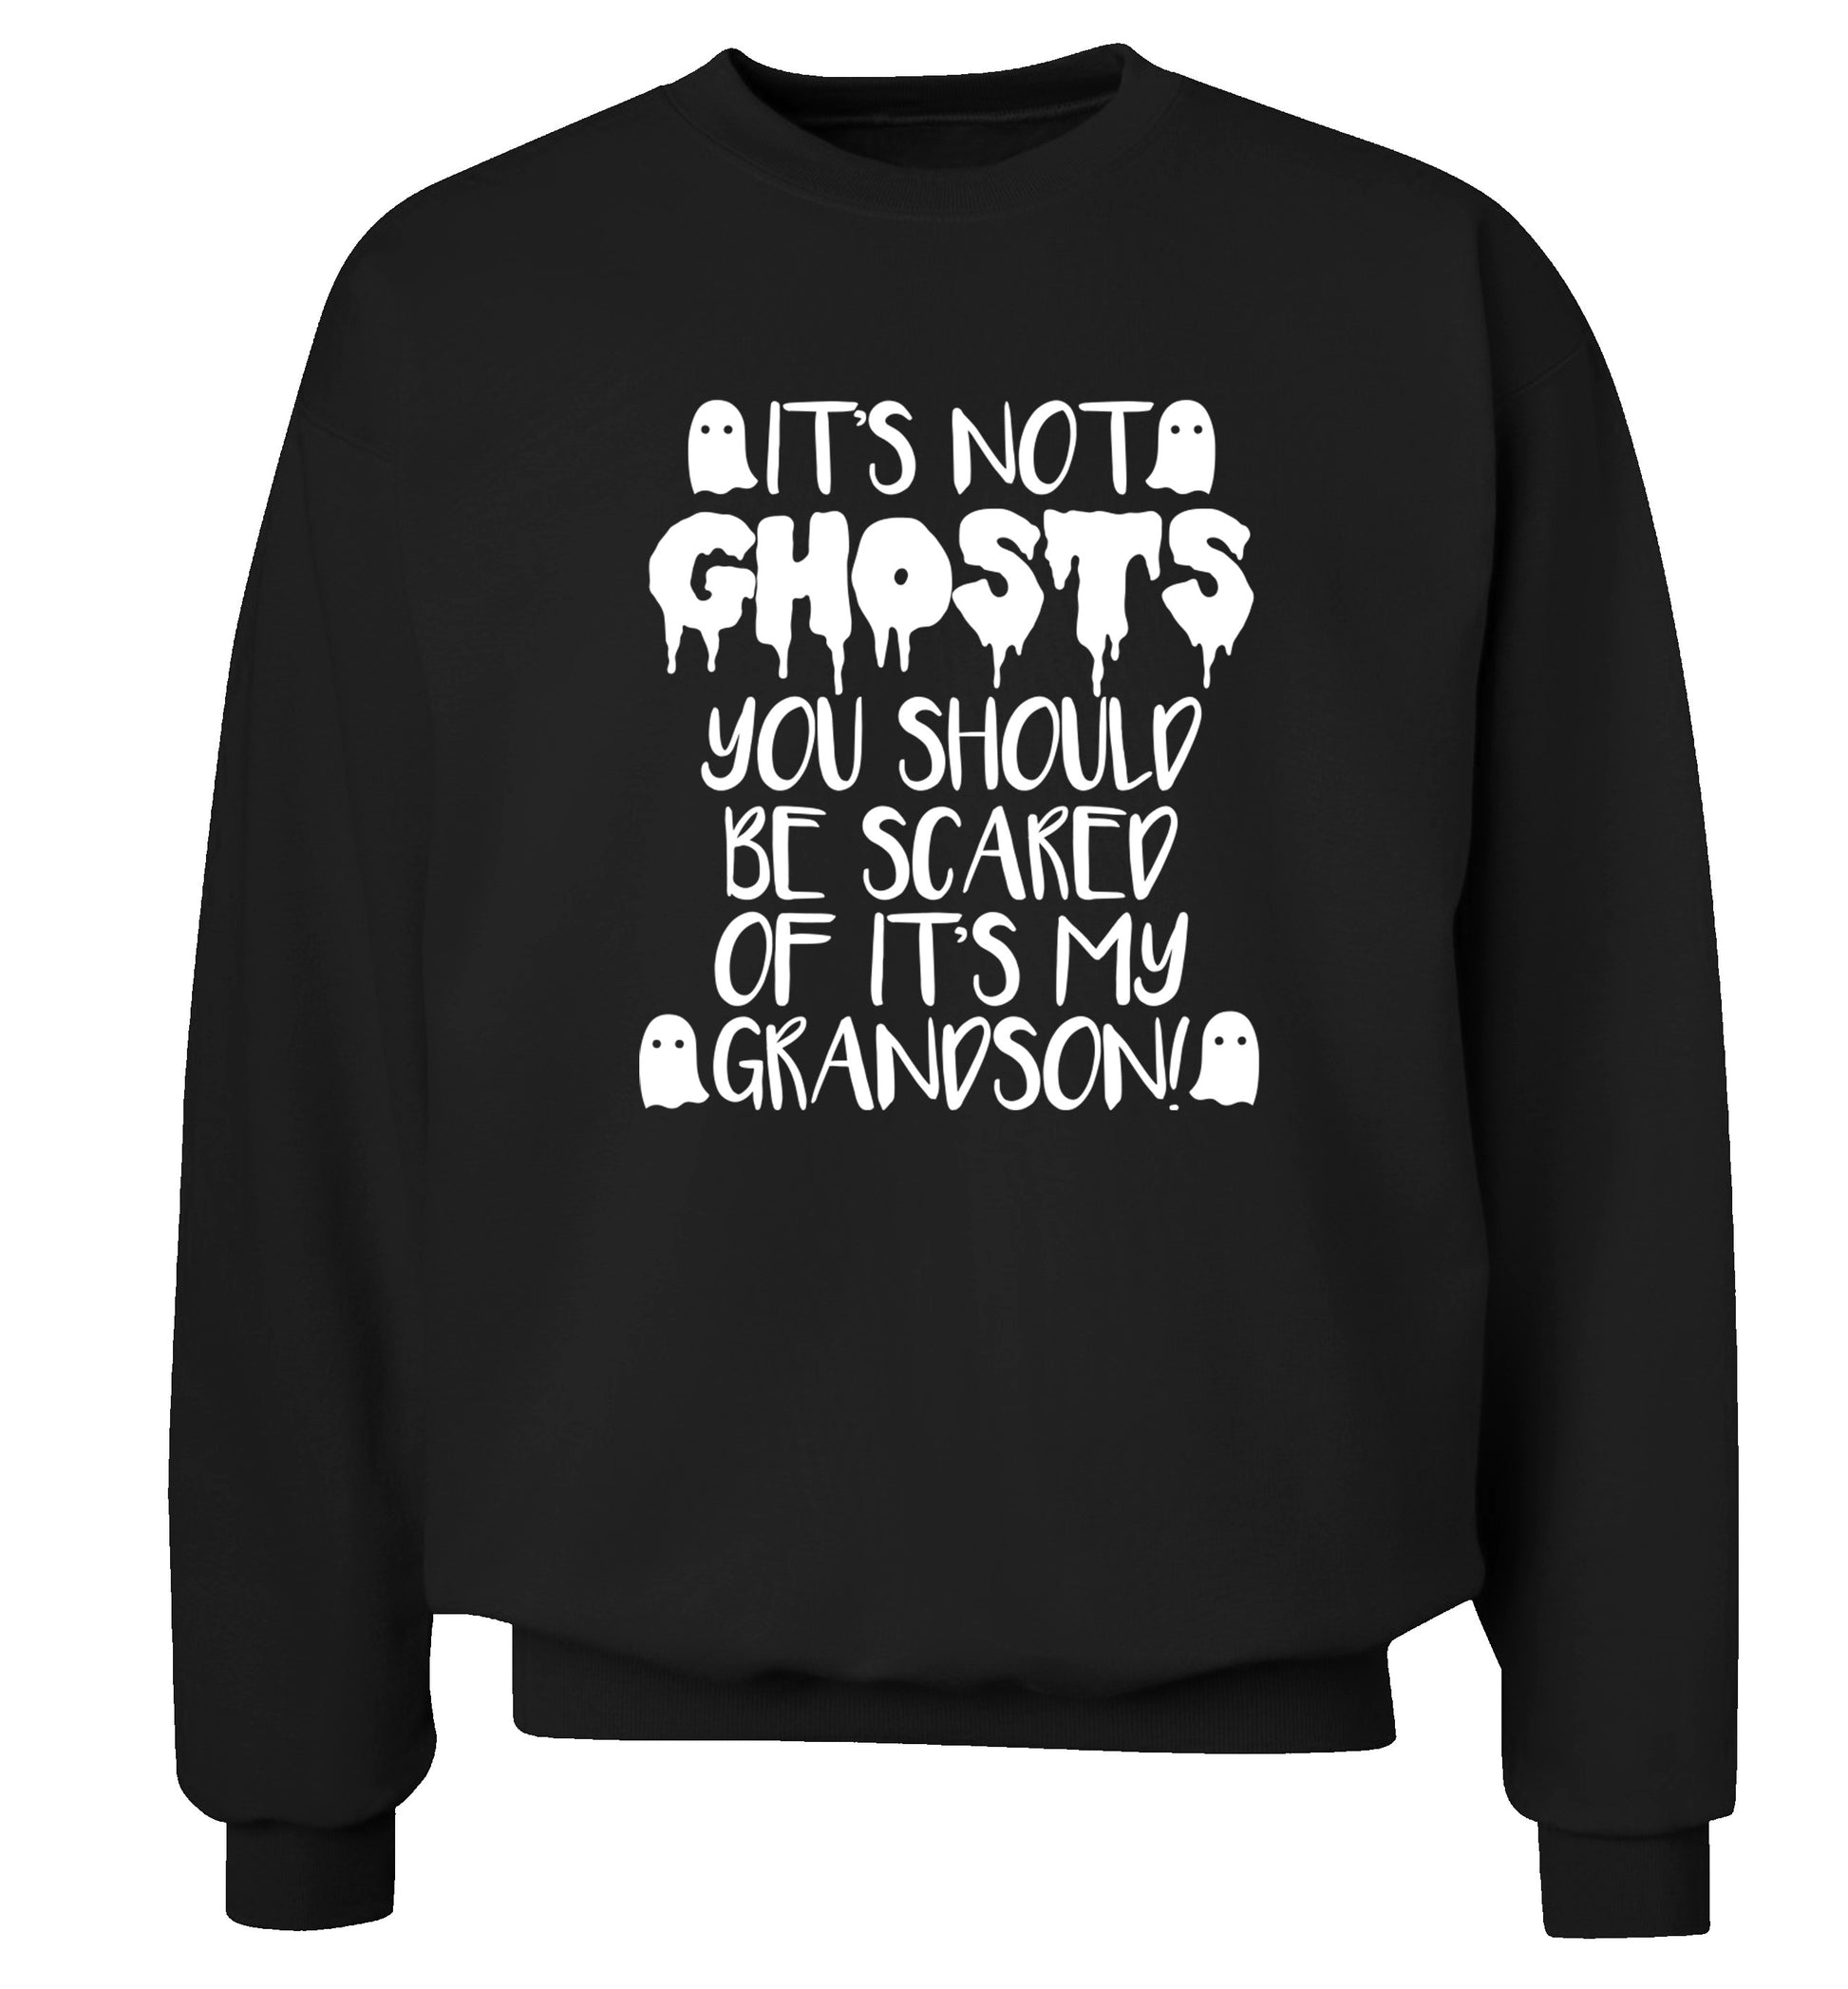 It's not ghosts you should be scared of it's my grandson! Adult's unisex black Sweater 2XL